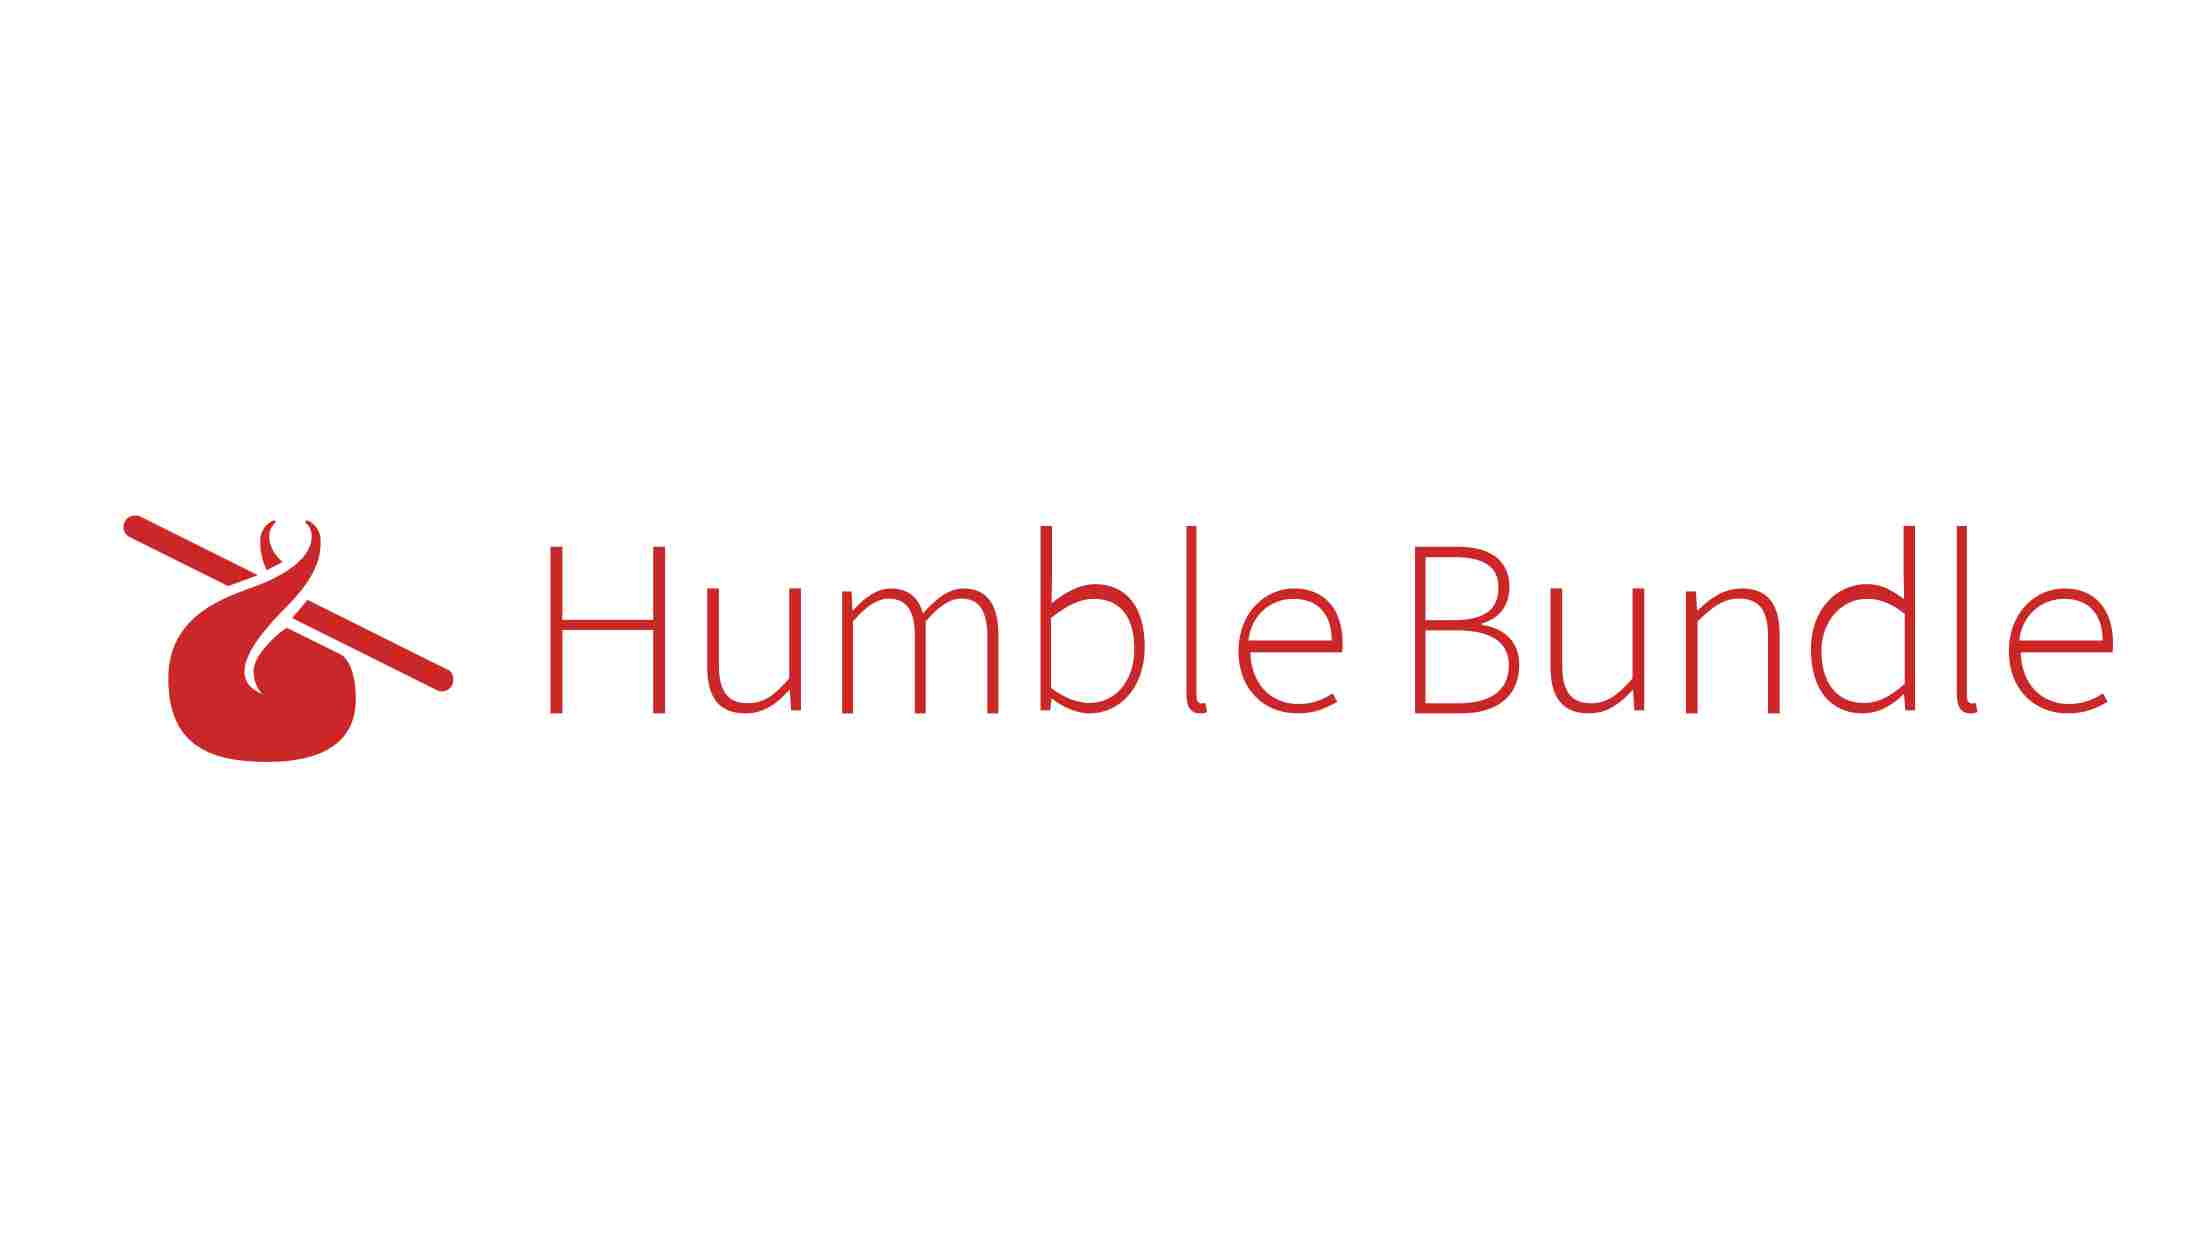 Humble Bundle was acquired by media giant IGN - Android Authority